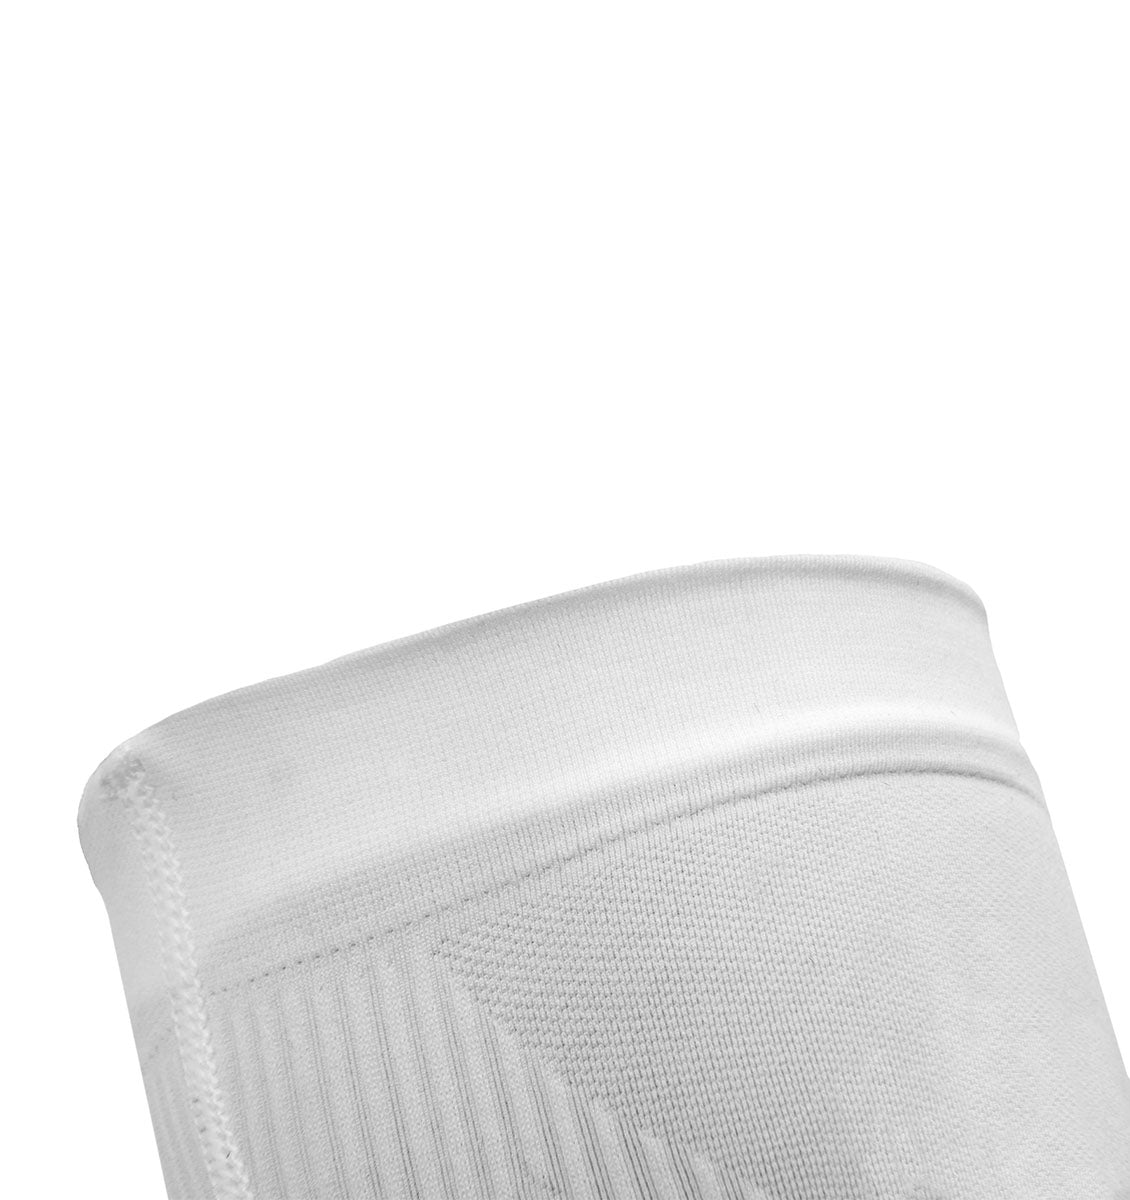 adidas Compression Calf Sleeves - White - 3